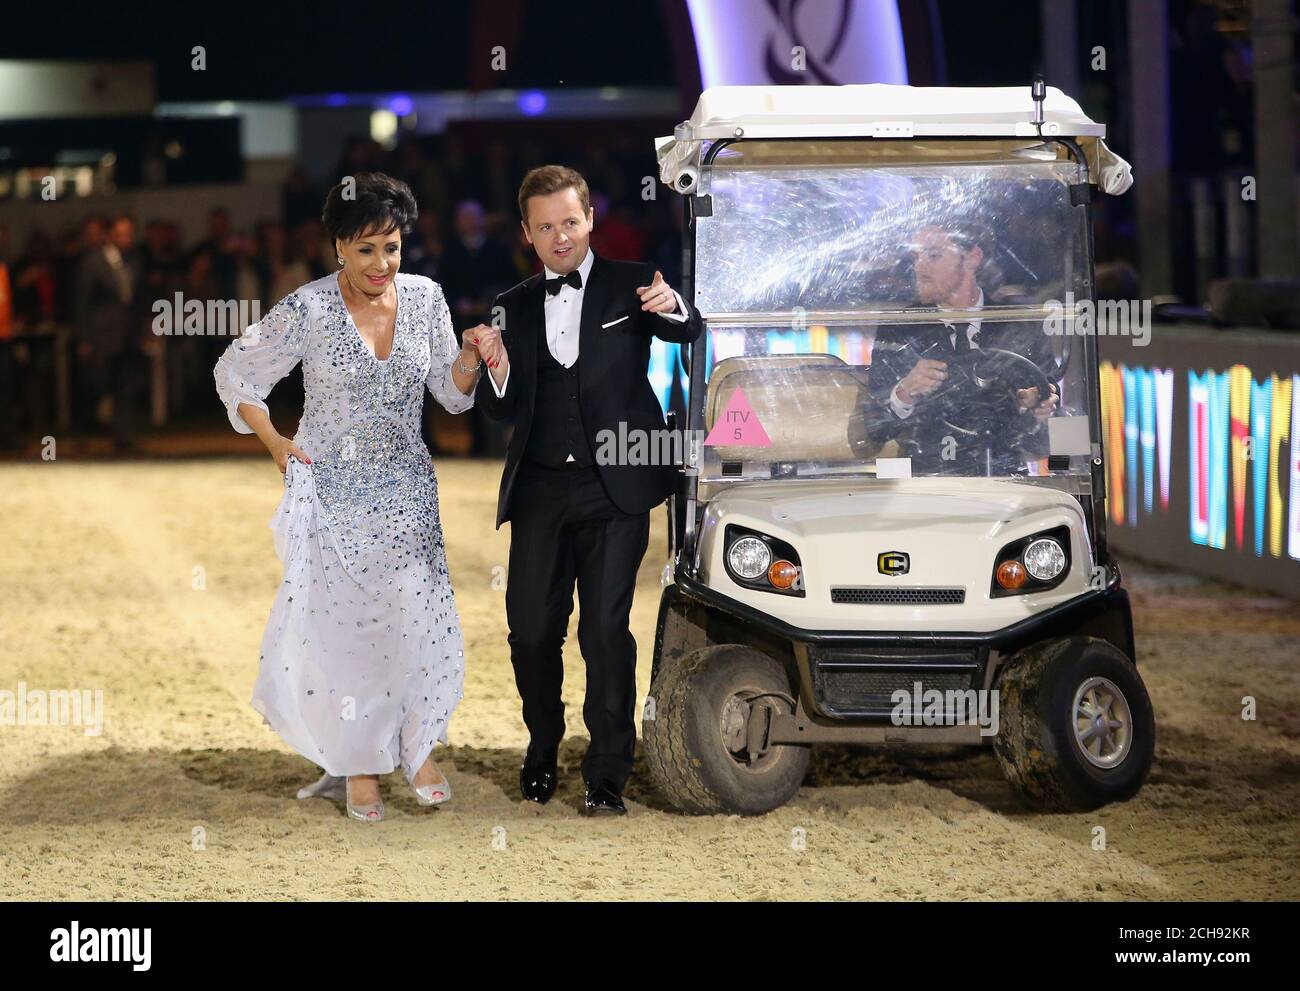 Dame Shirley Bassey and Declan Donnelly during the televised celebration of the Queen's 90th birthday in the grounds of Windsor Castle in Berkshire. Stock Photo